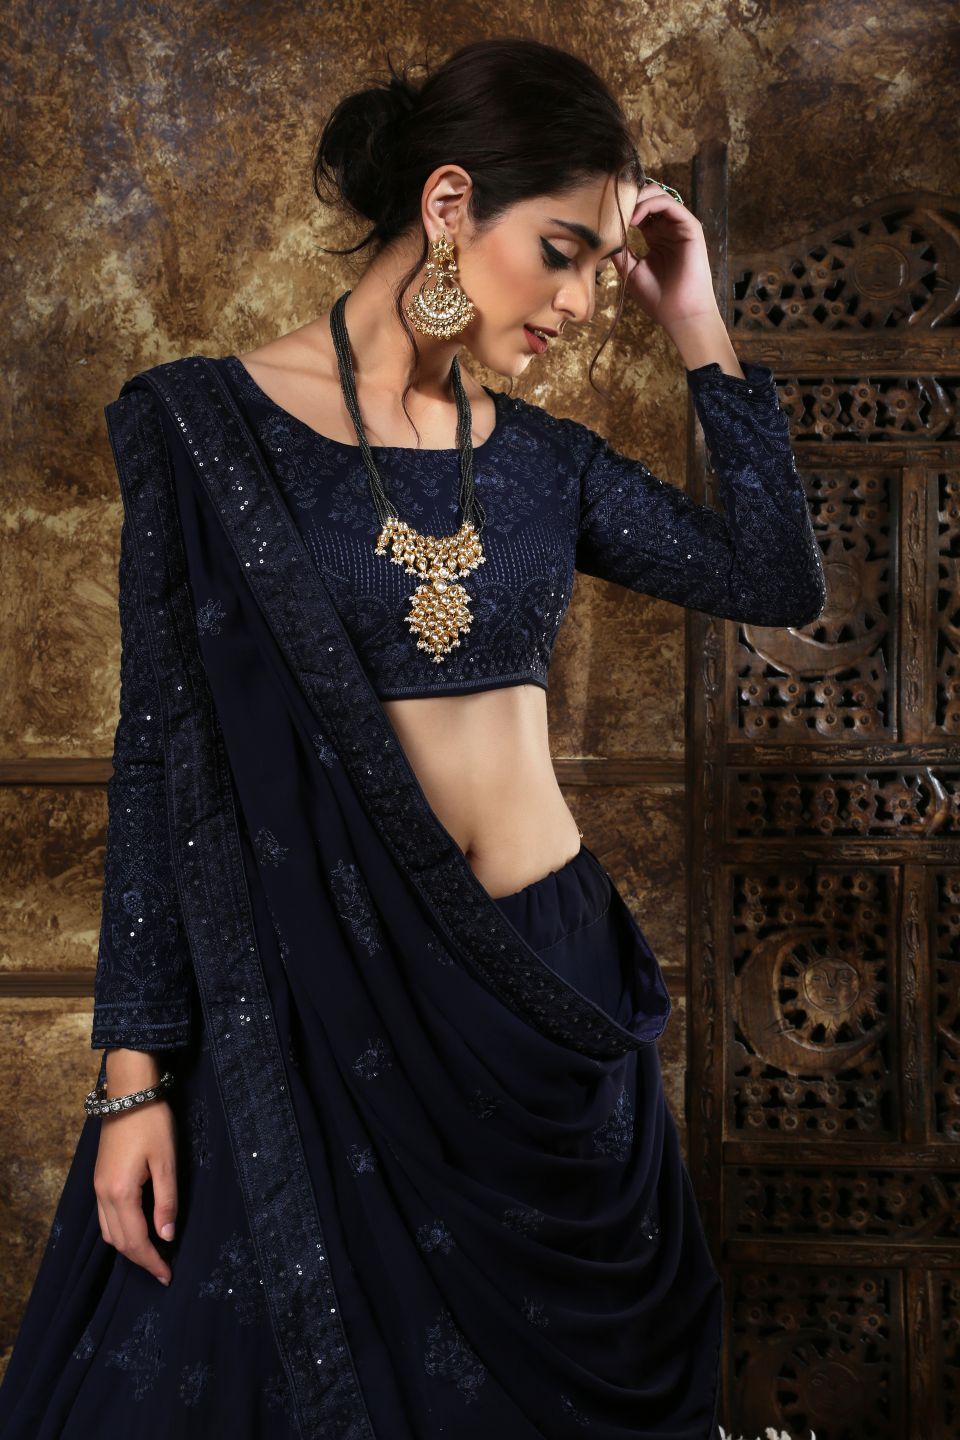 Embroidered Georgette Lehenga In Blue